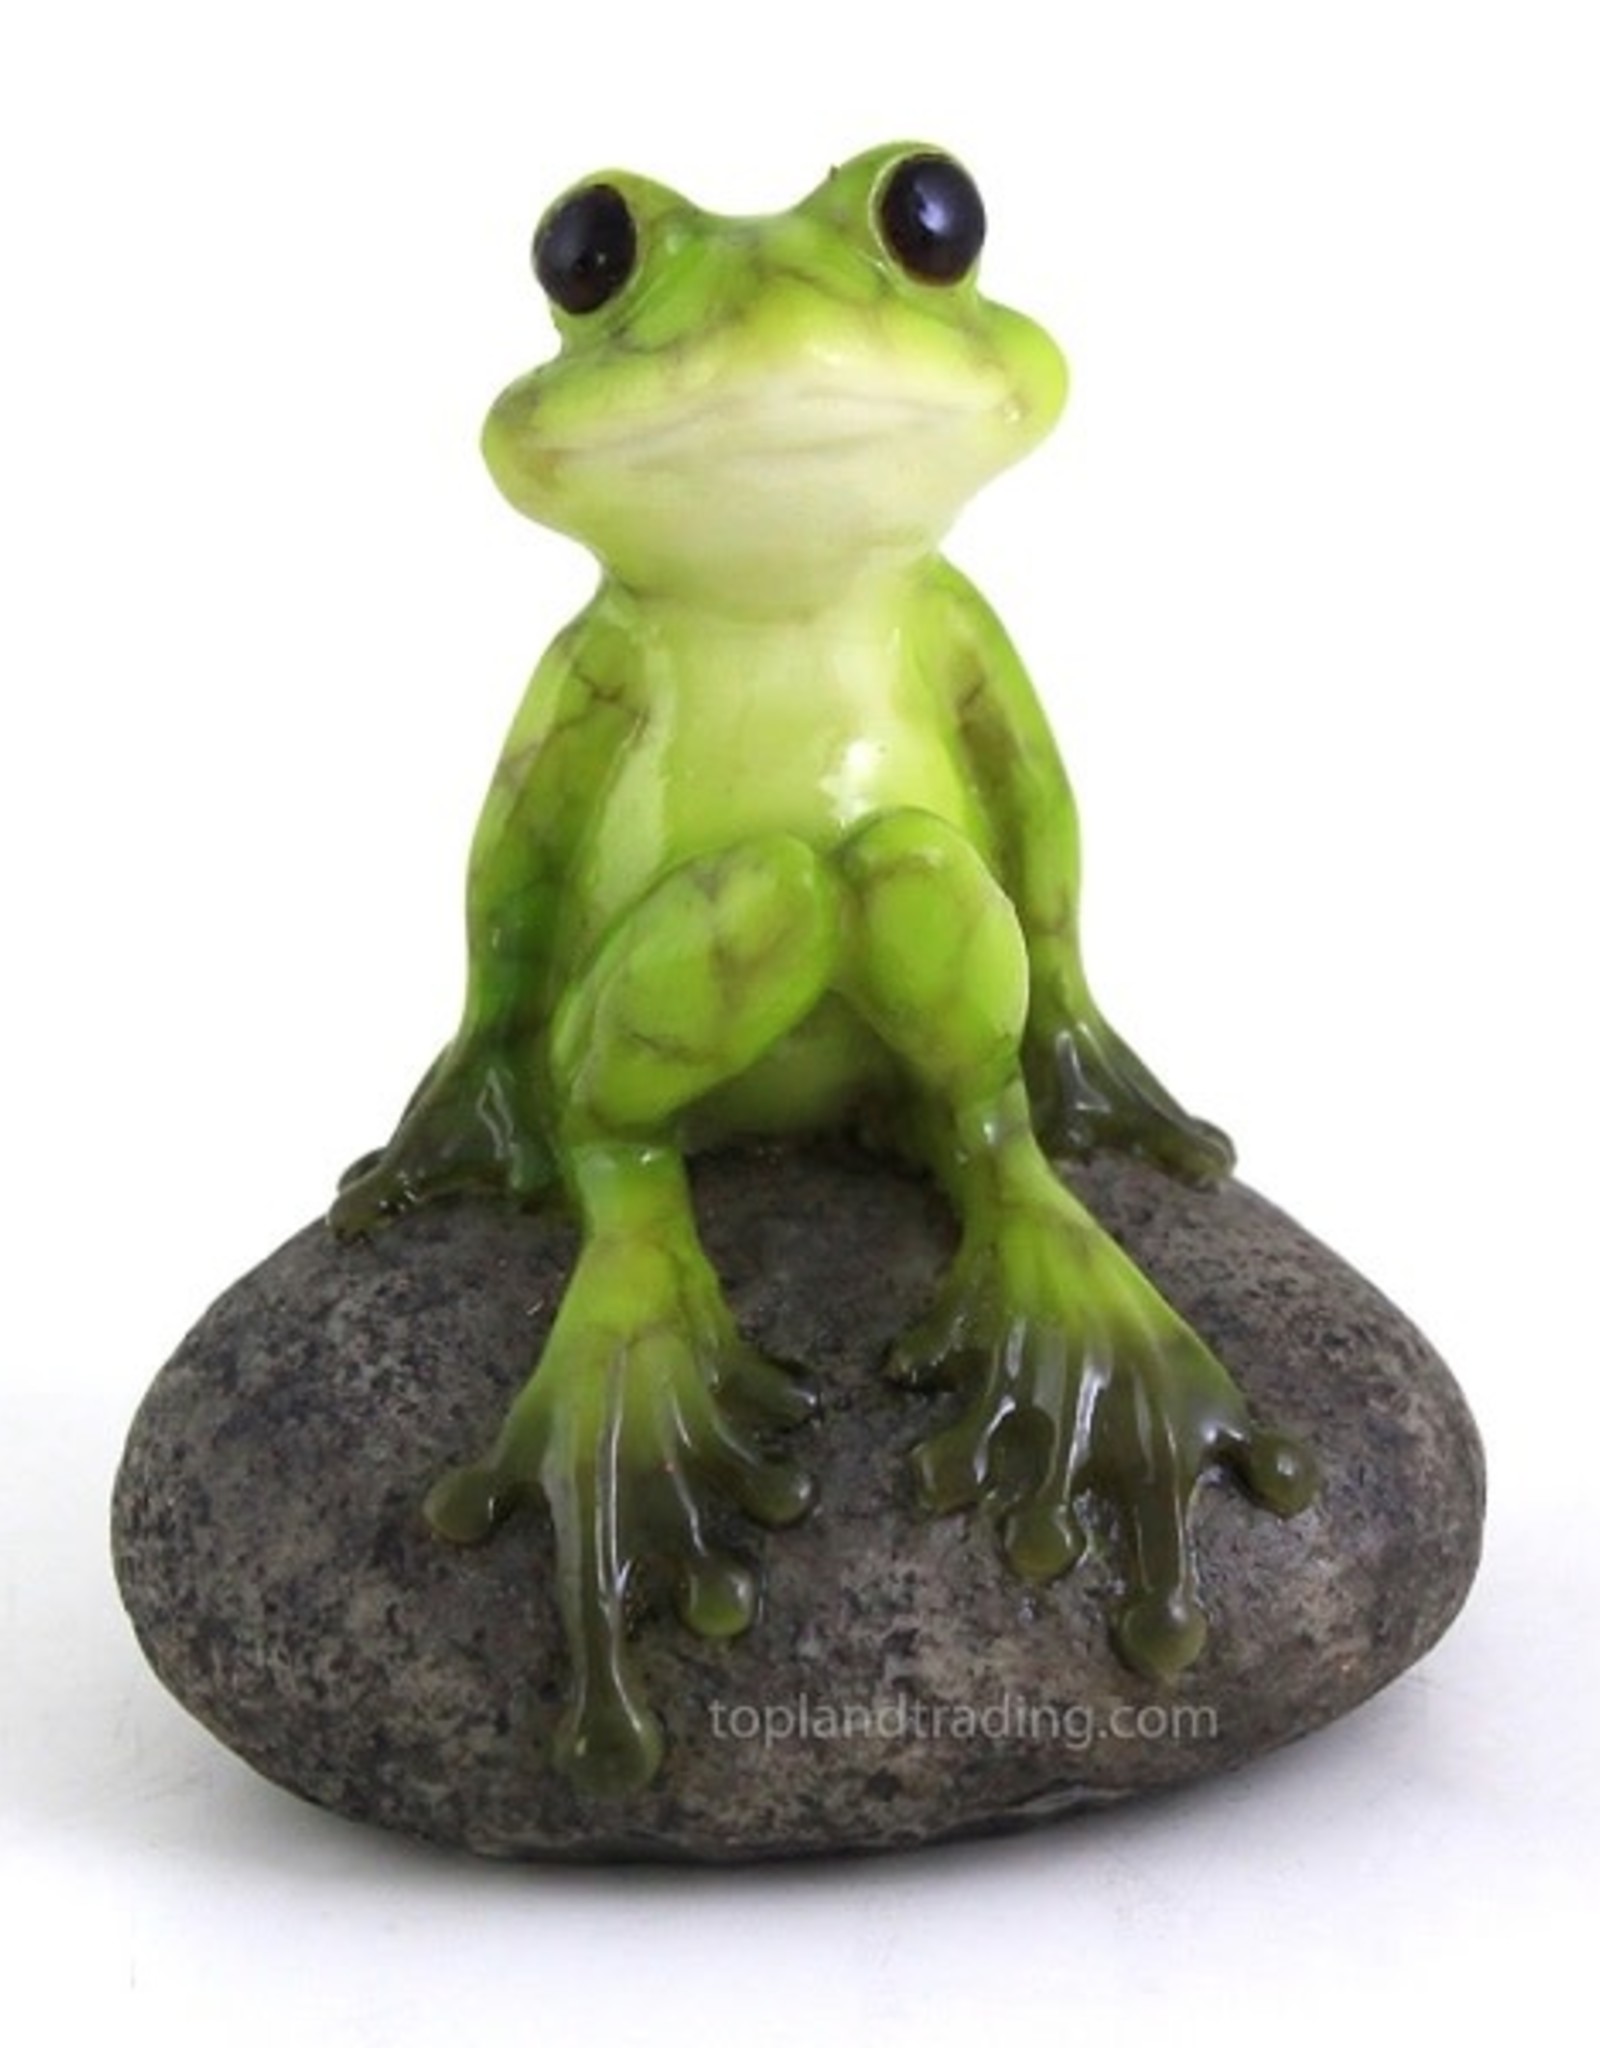 Top Land Trading CUTE FROG ON STONE